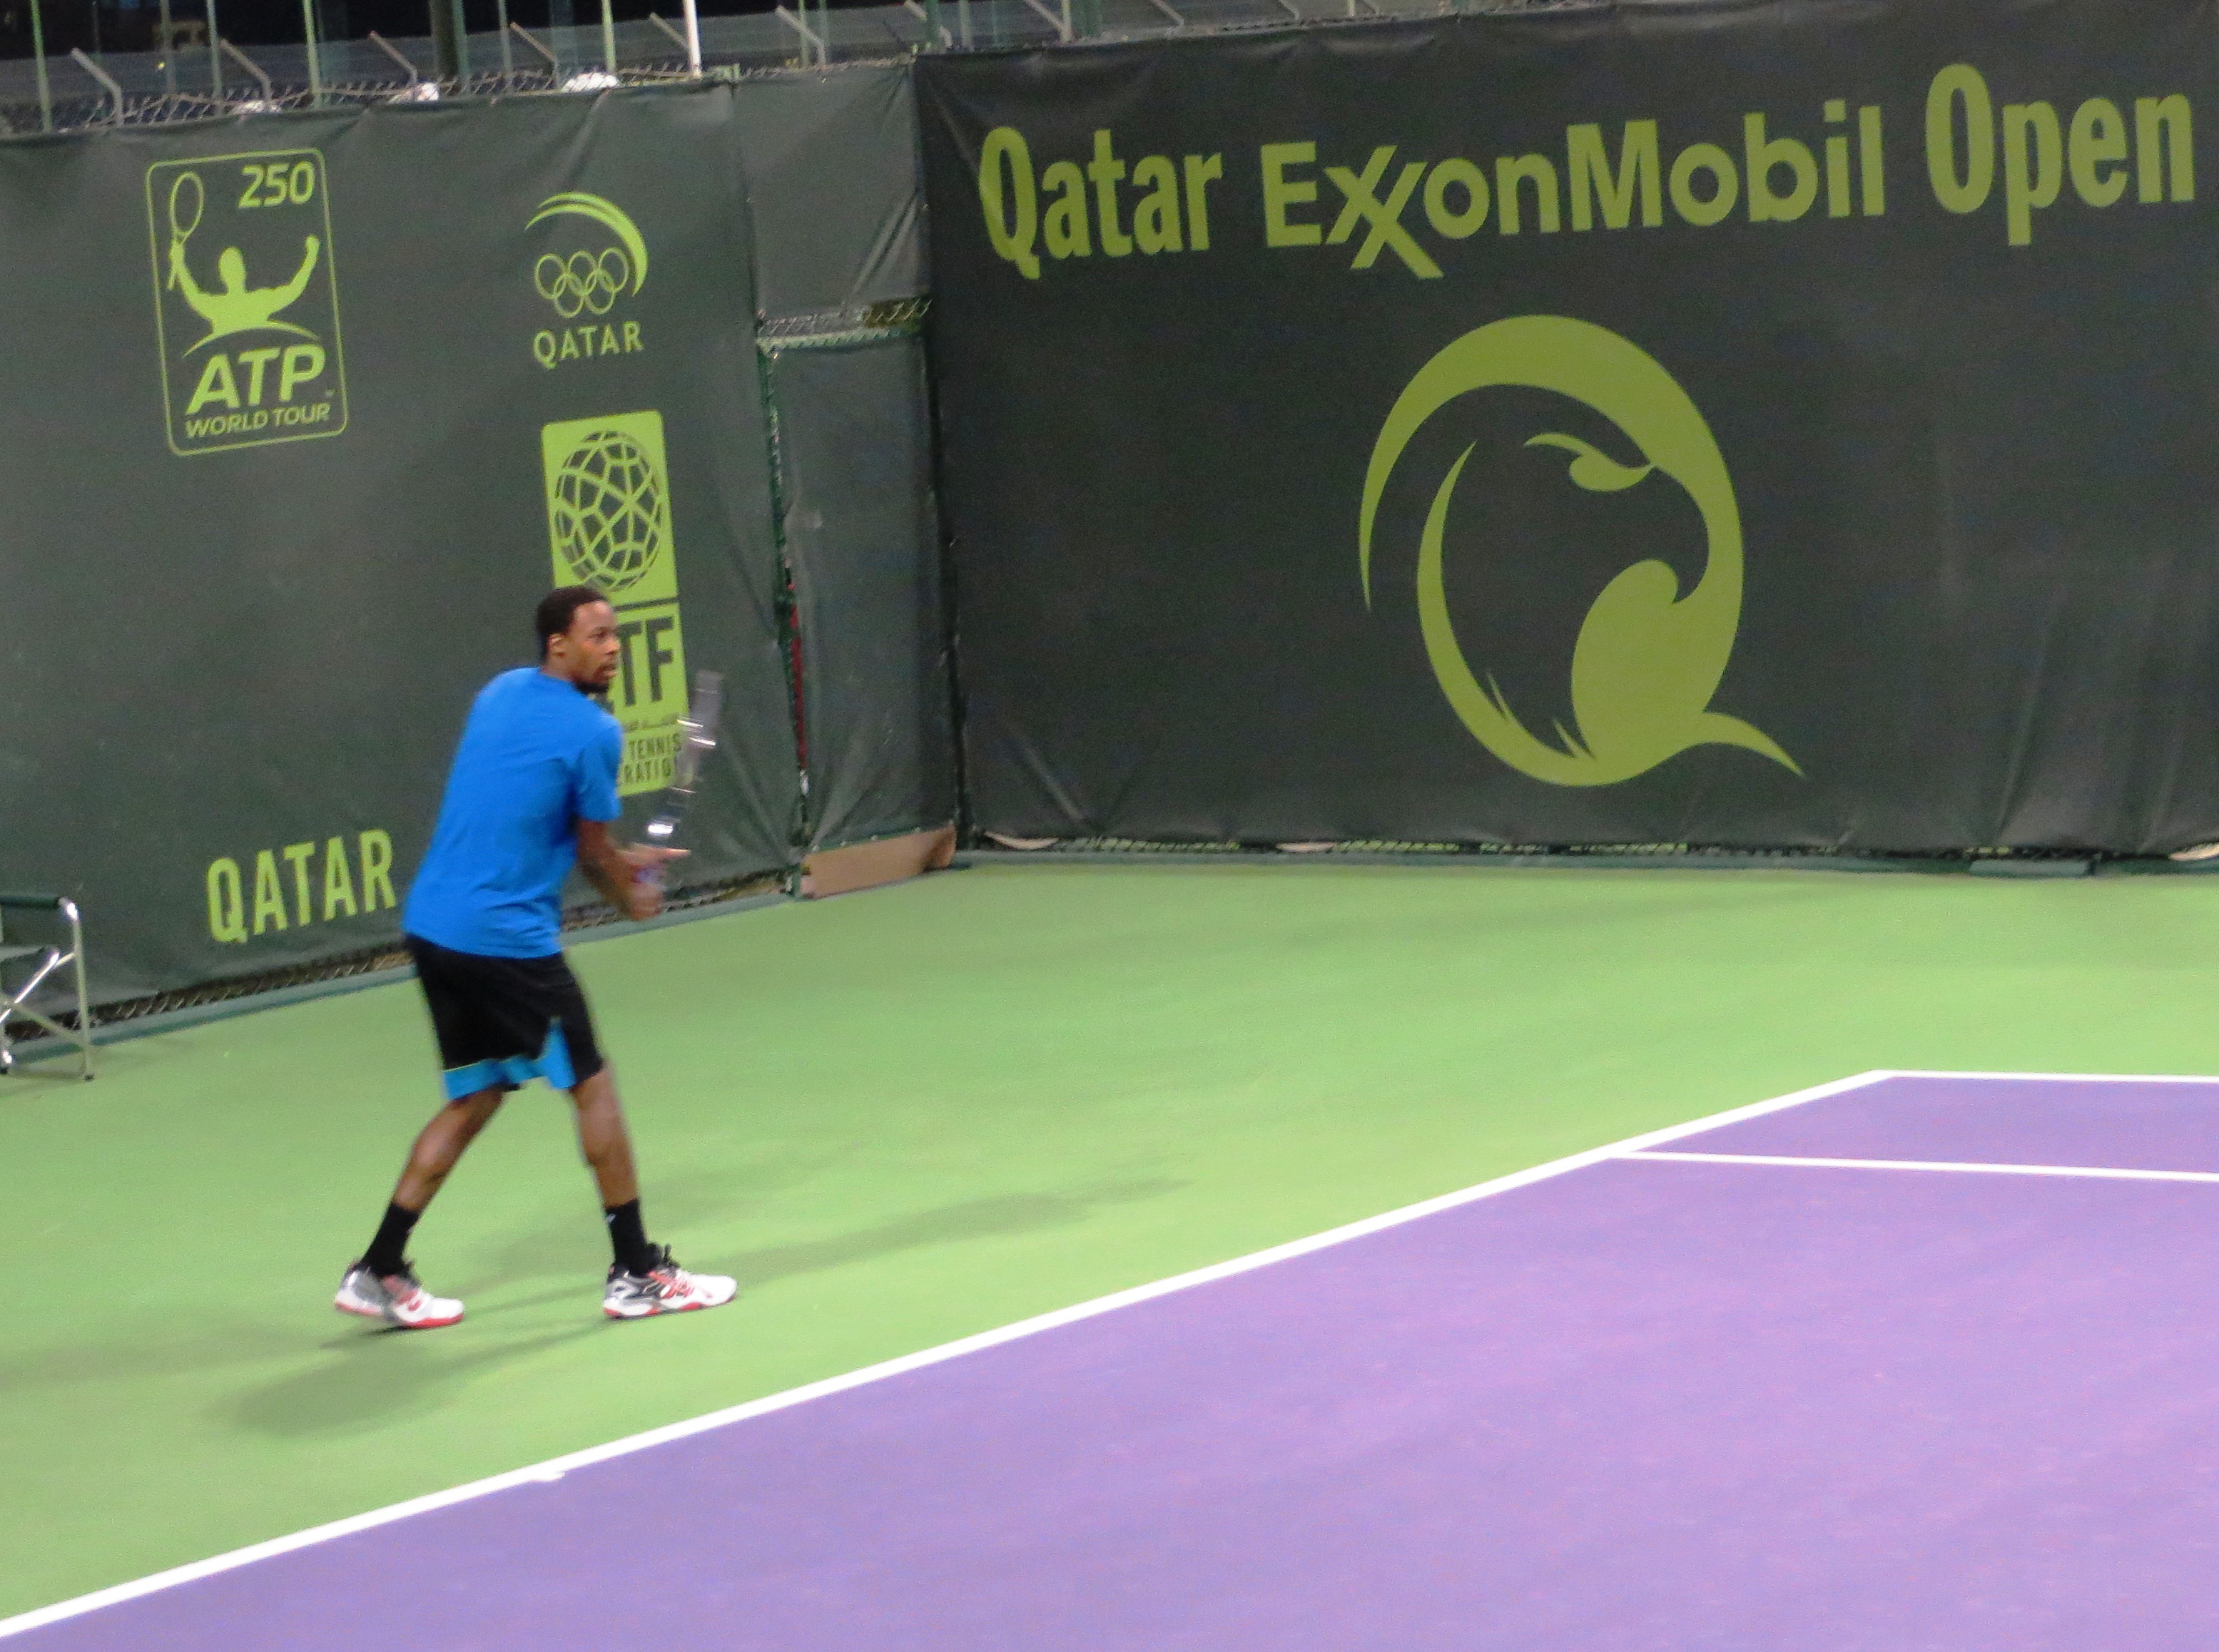 Monfils practicing before the final